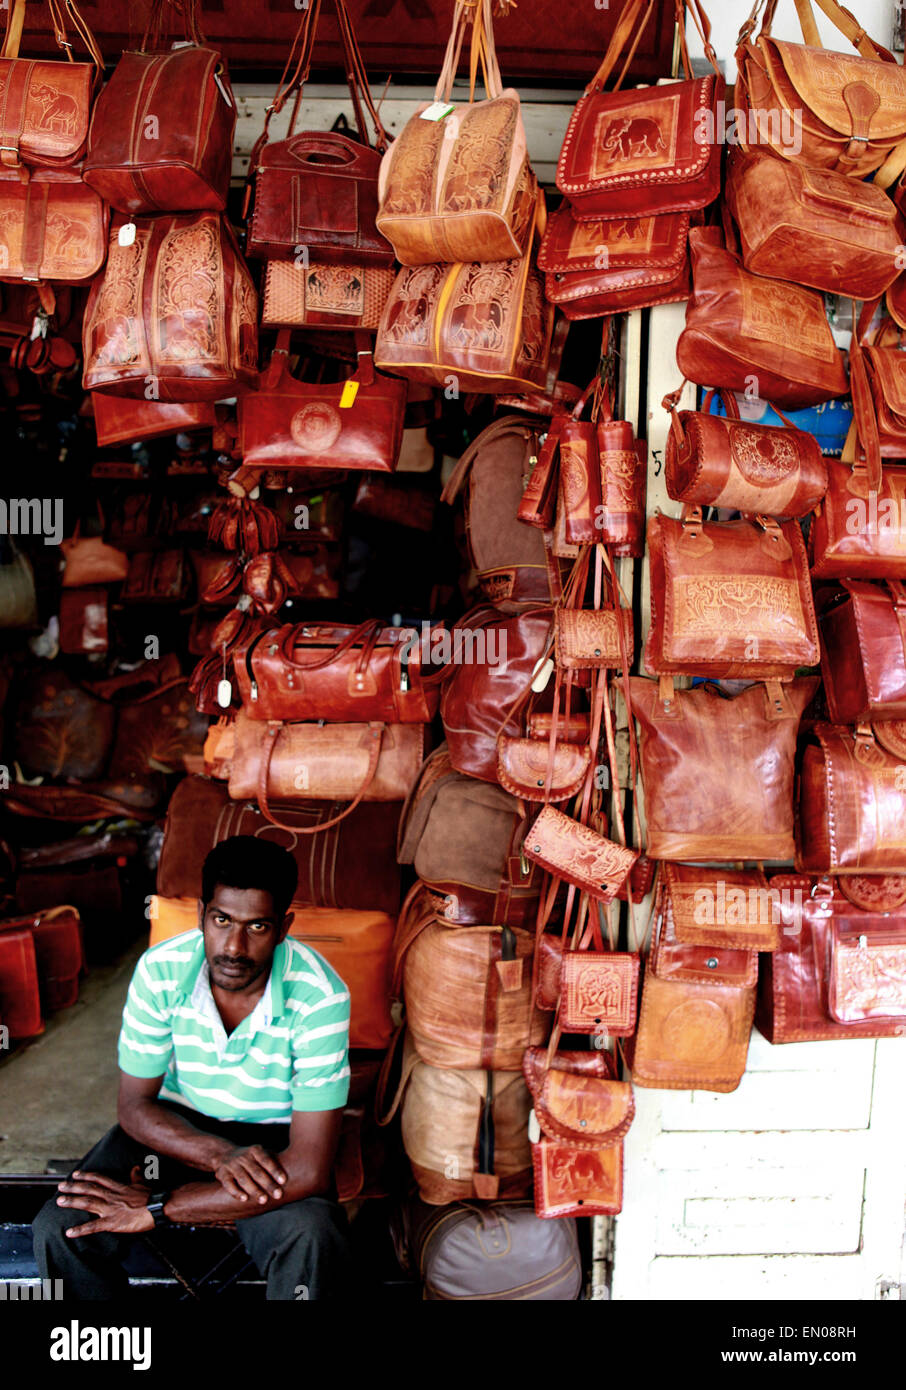 Sri Lanka: man selling leather bags in Galle Fort Stock Photo - Alamy